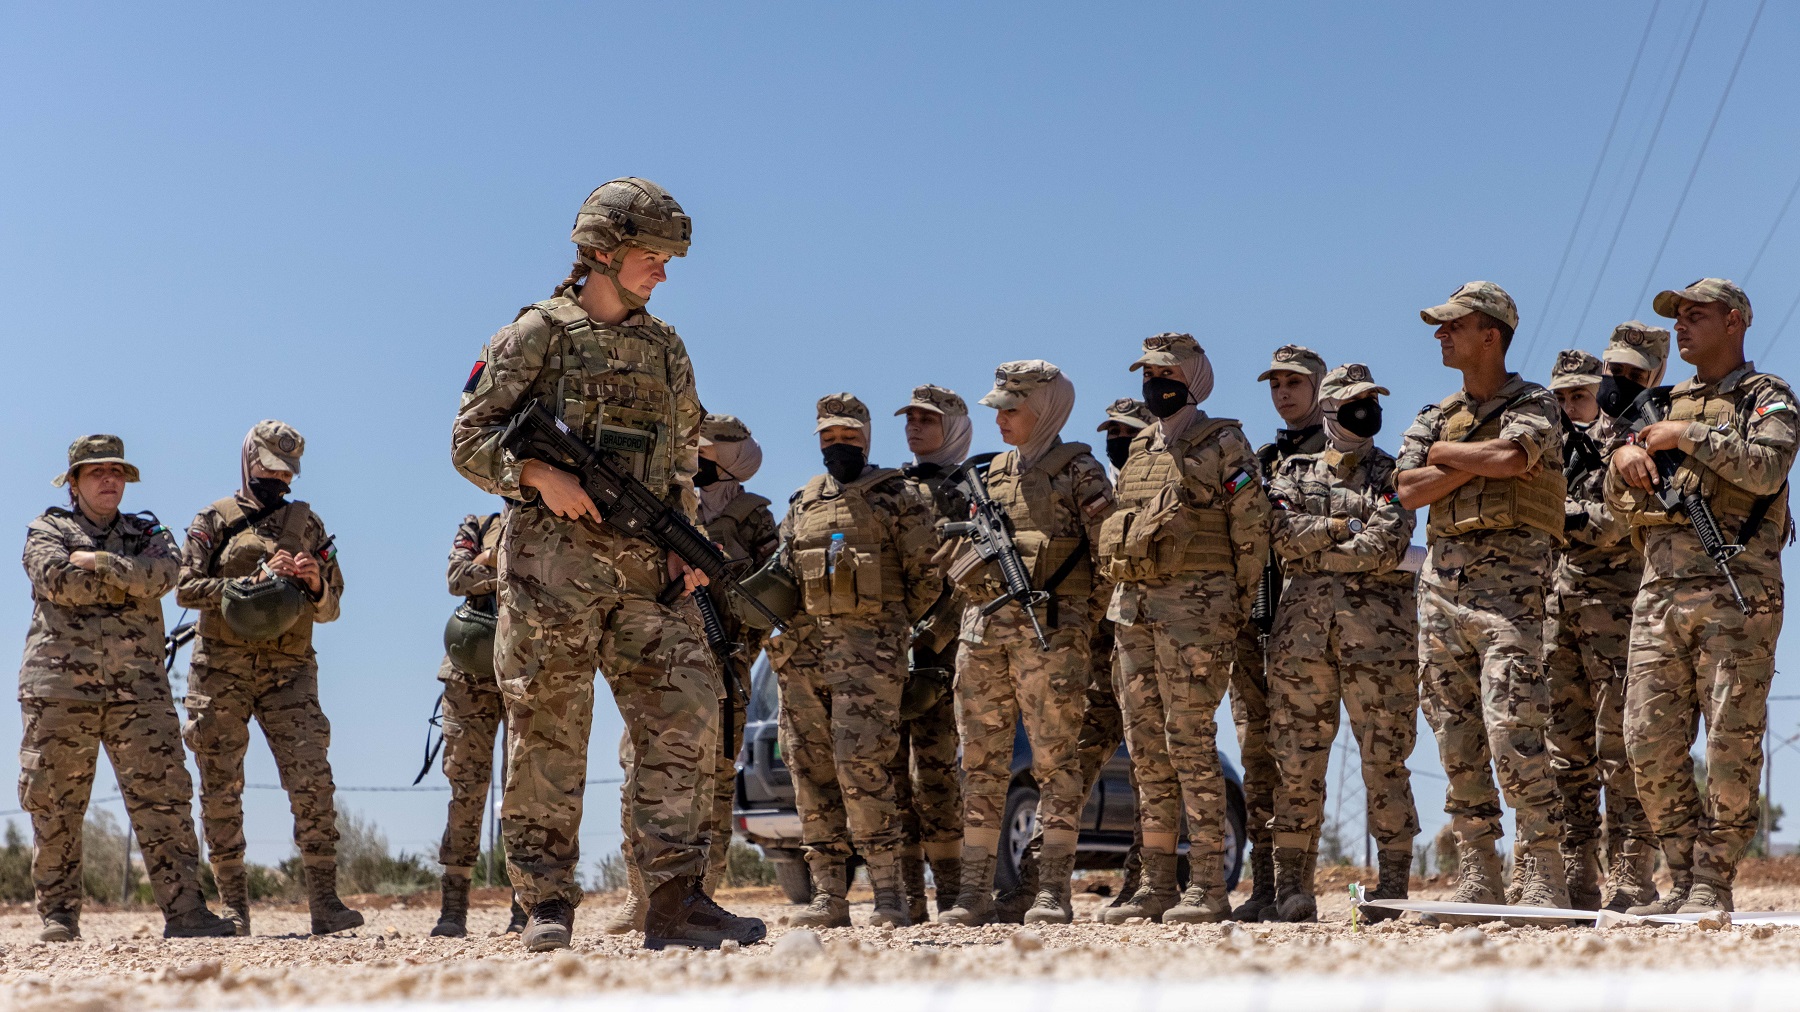 16 Air Assault Brigade Female Engagement Team conduct training with soldiers and officers from the Jordanian Army as a joint force on counter IED operations.